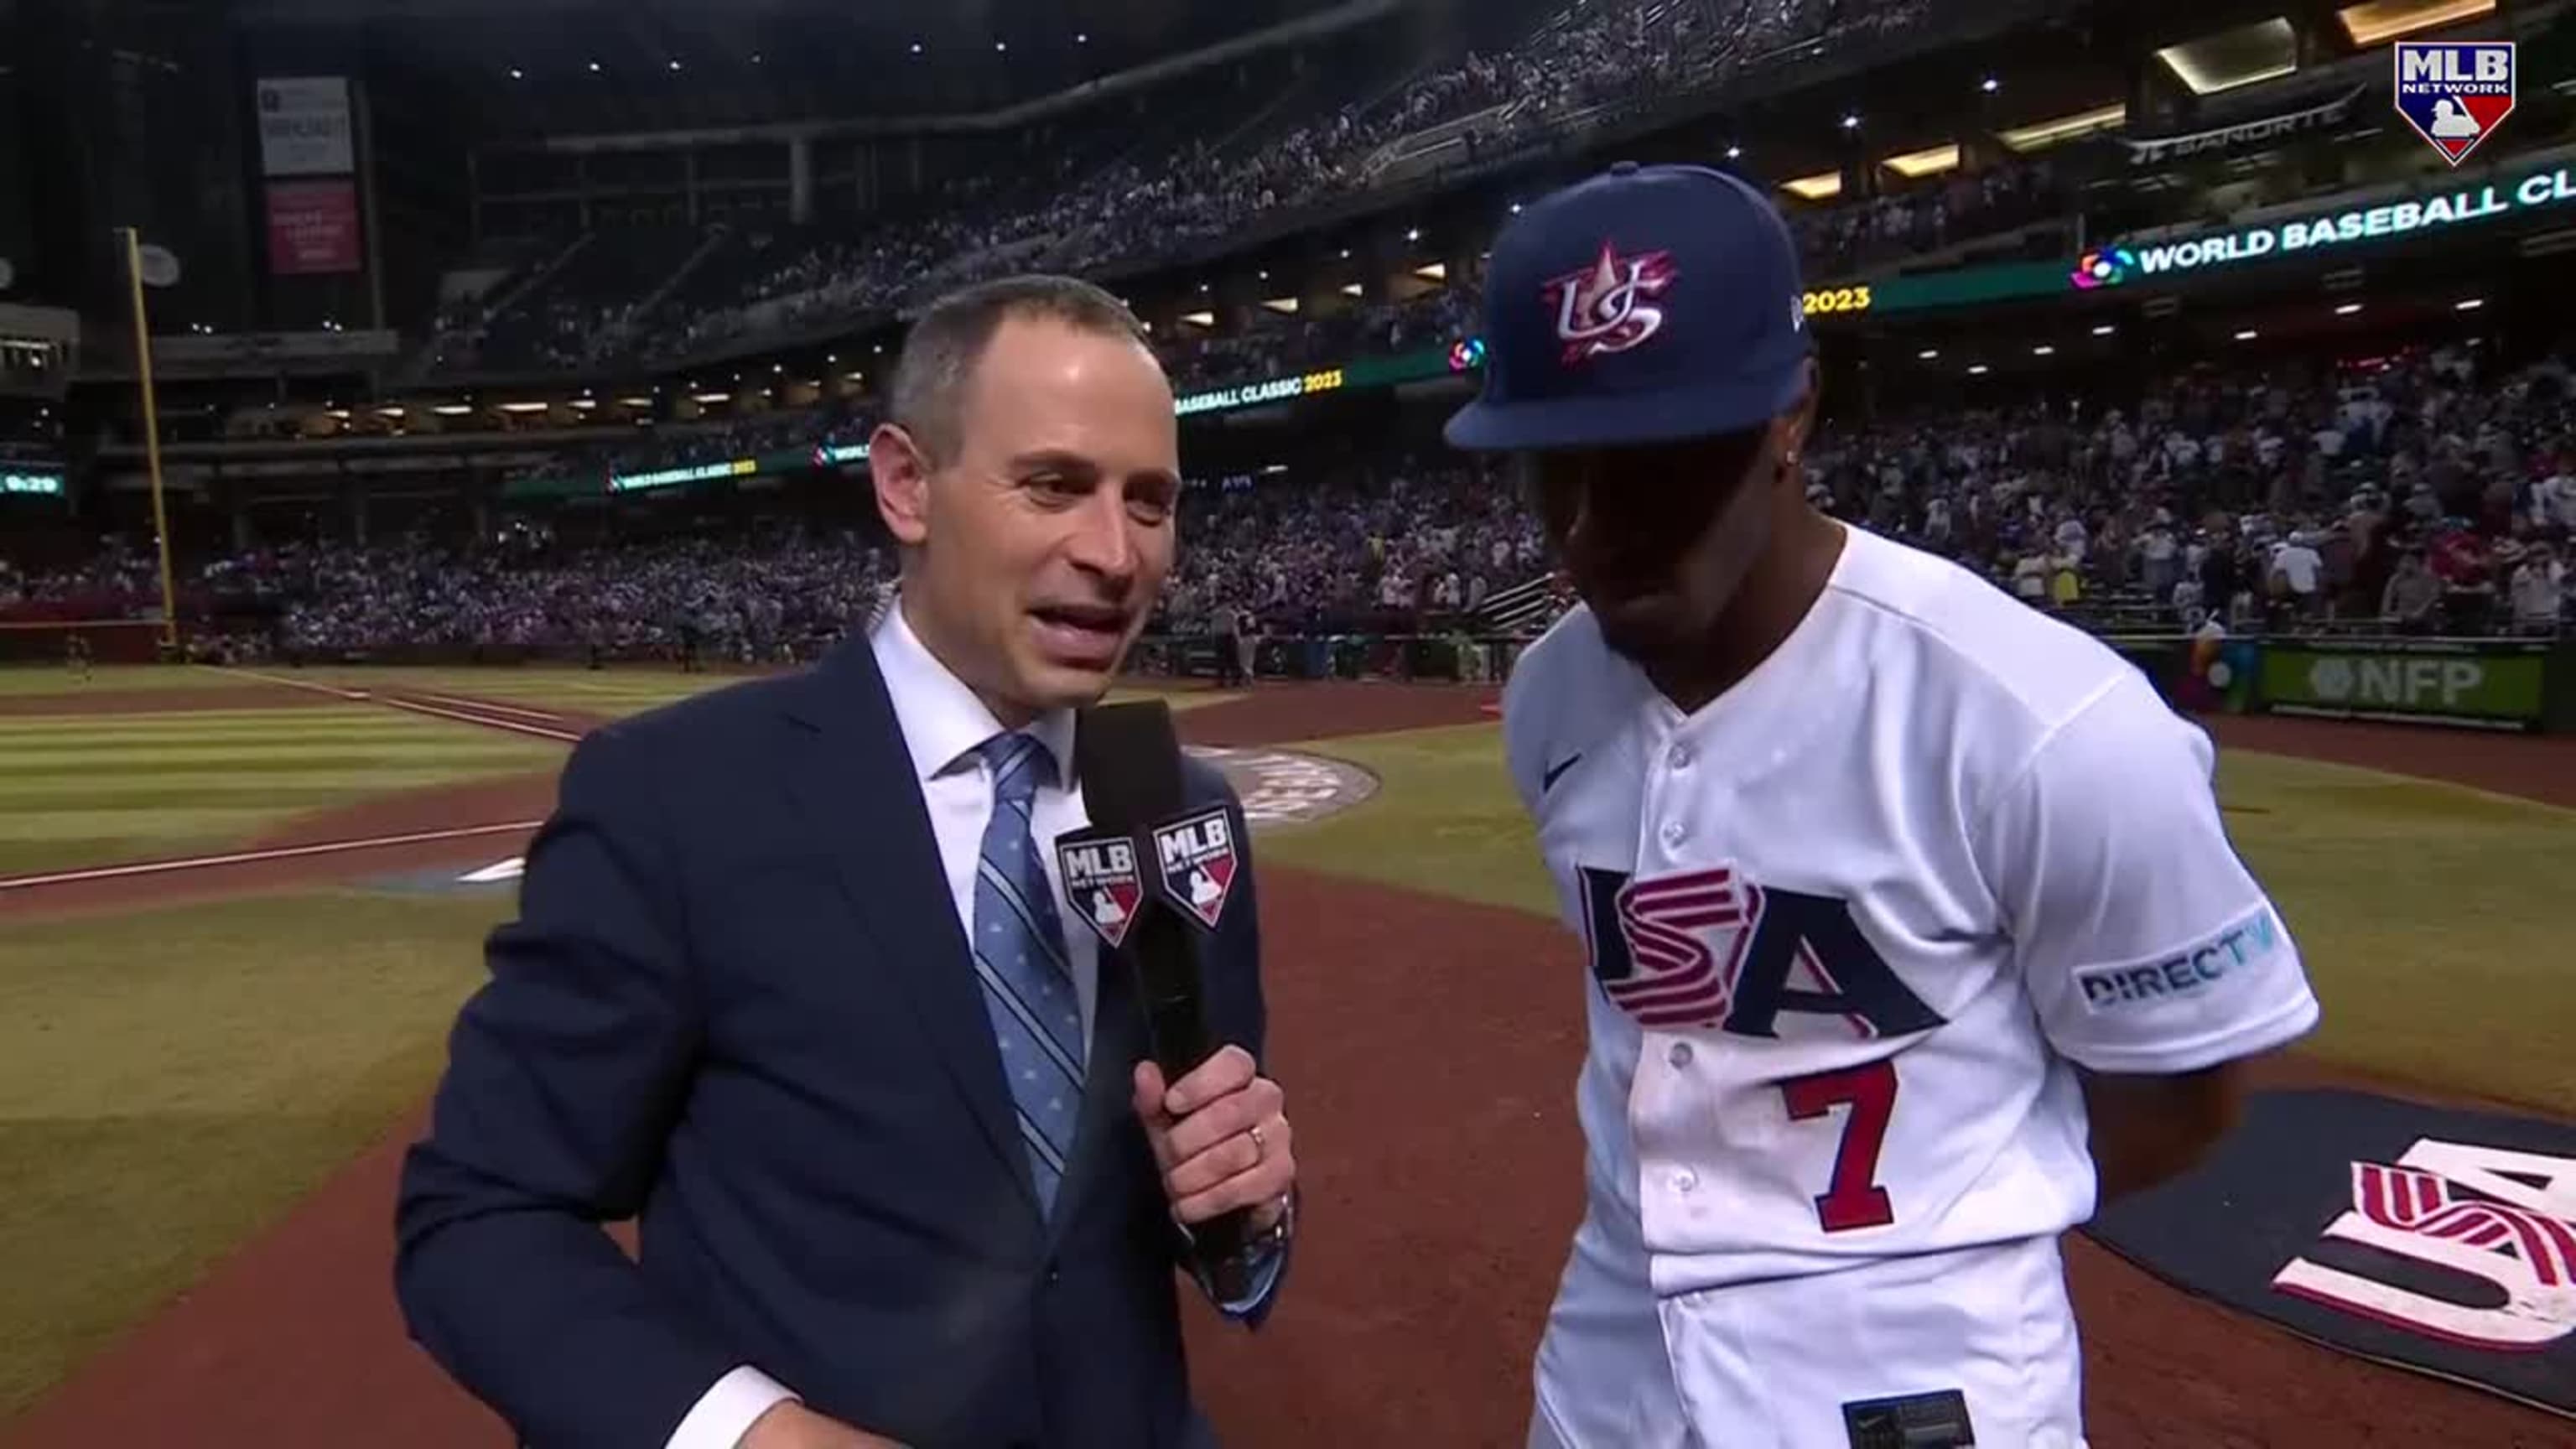 Team USA rebounds to rout Team Canada in 2023 World Baseball Classic